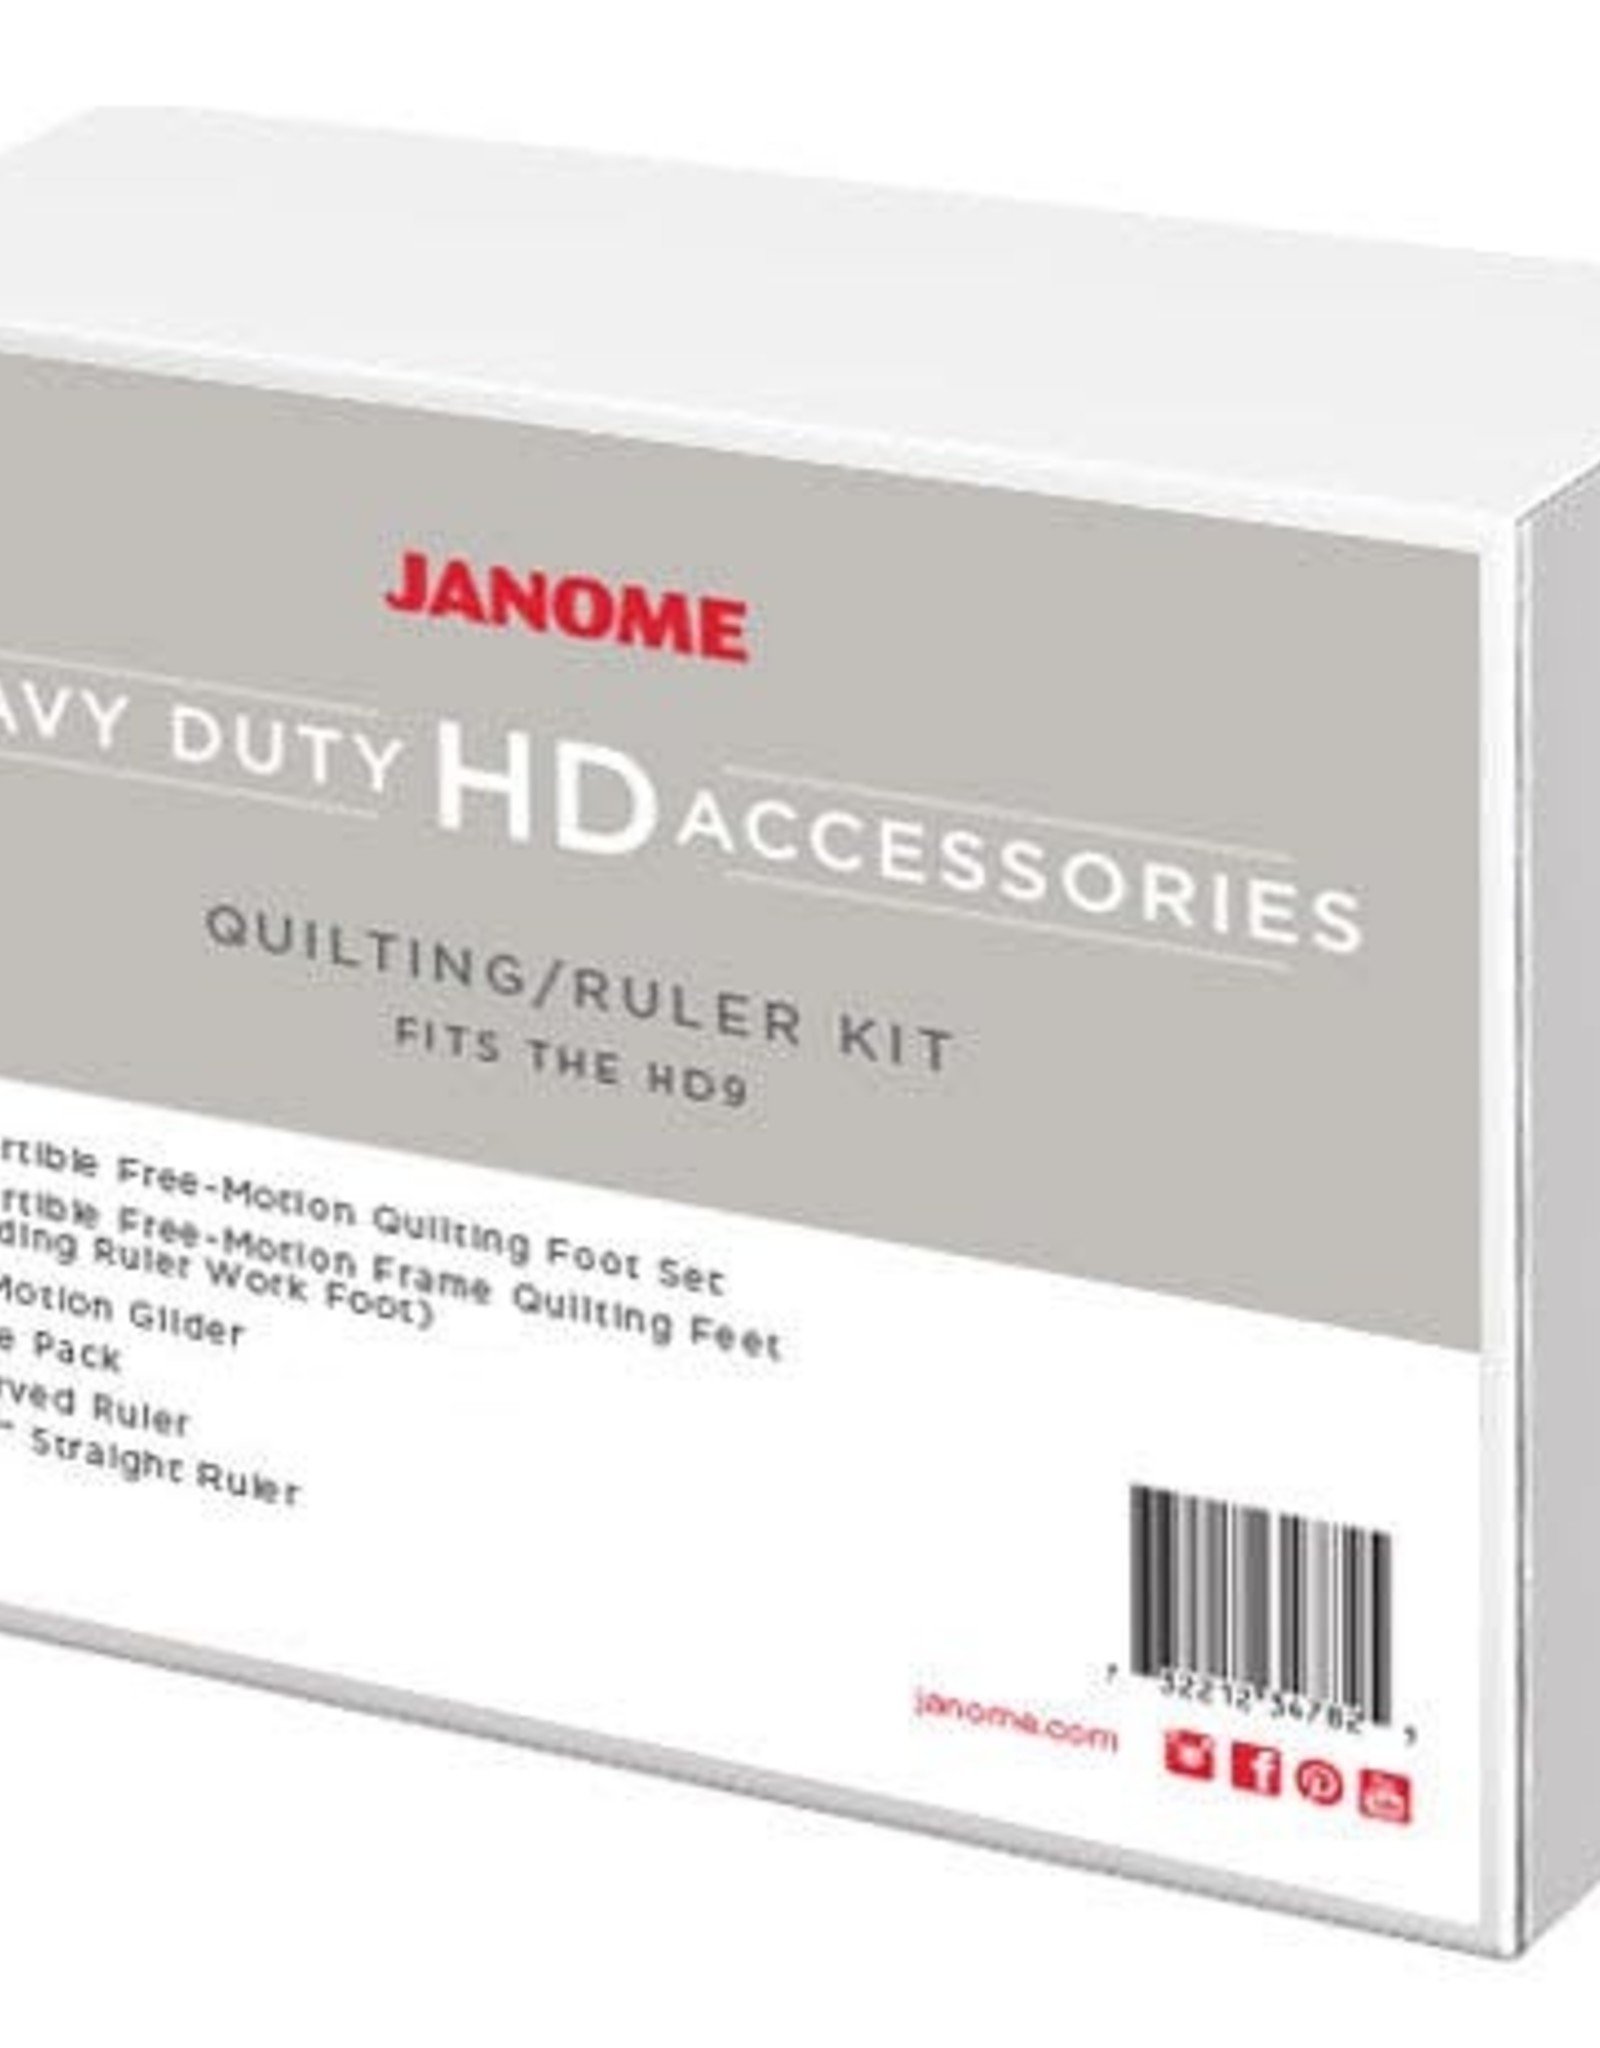 Janome HD Quilting and Ruler kit- fits the HD9